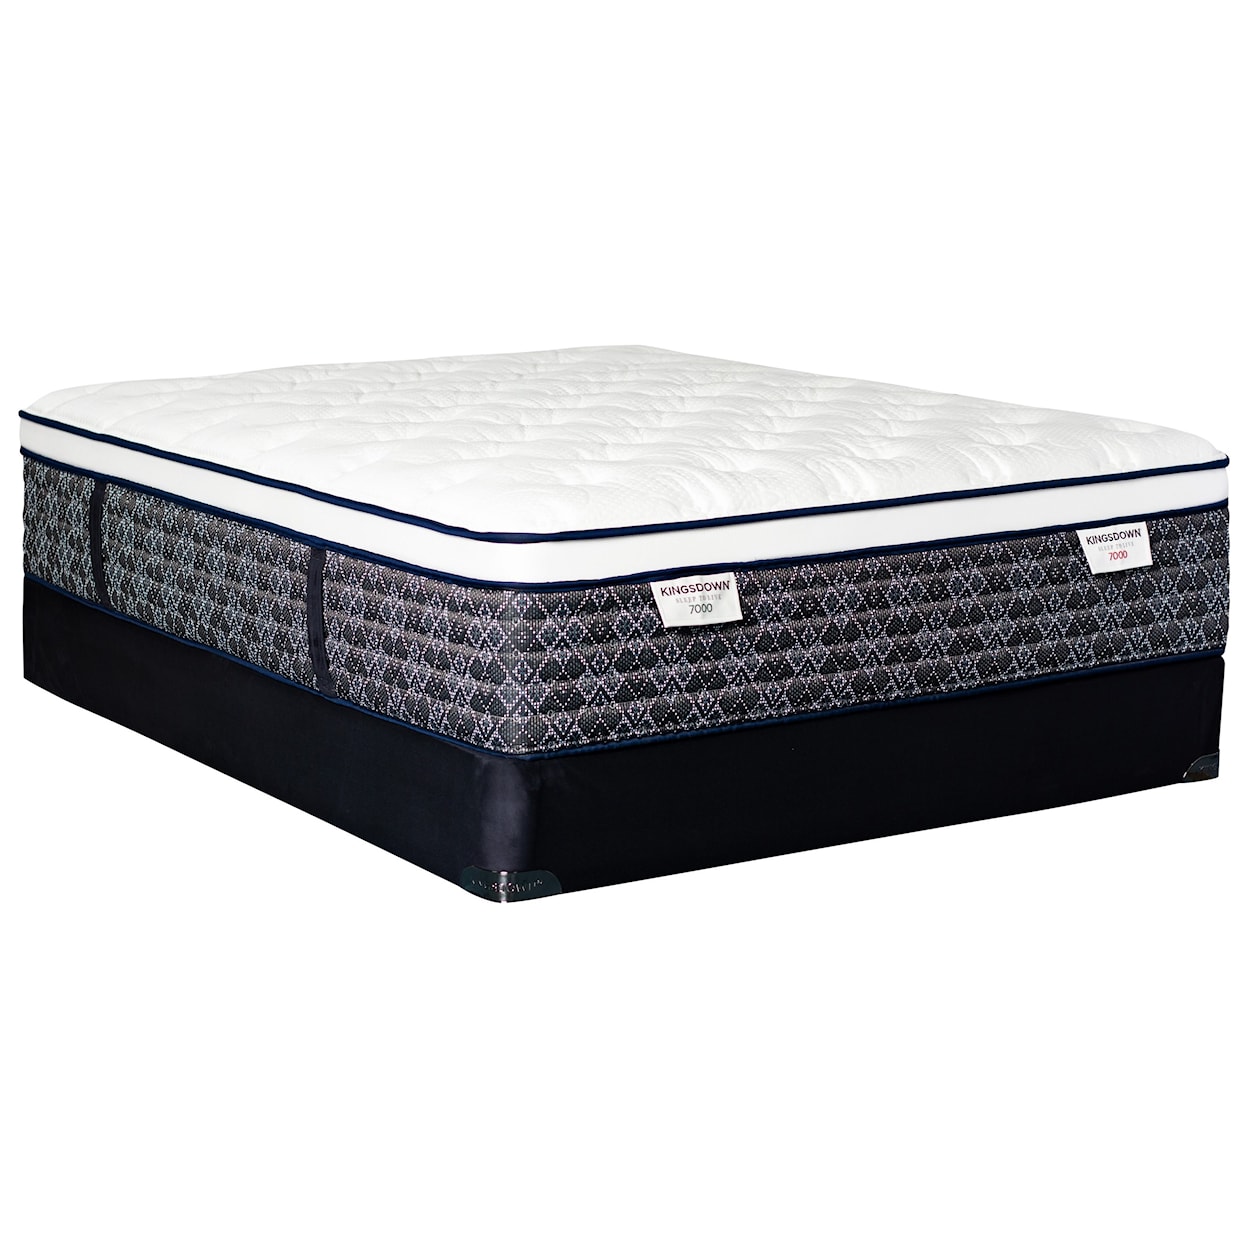 Kingsdown Sleep to Live 7000 Green Red ET Full Pocketed Coil Mattress LoPro Set